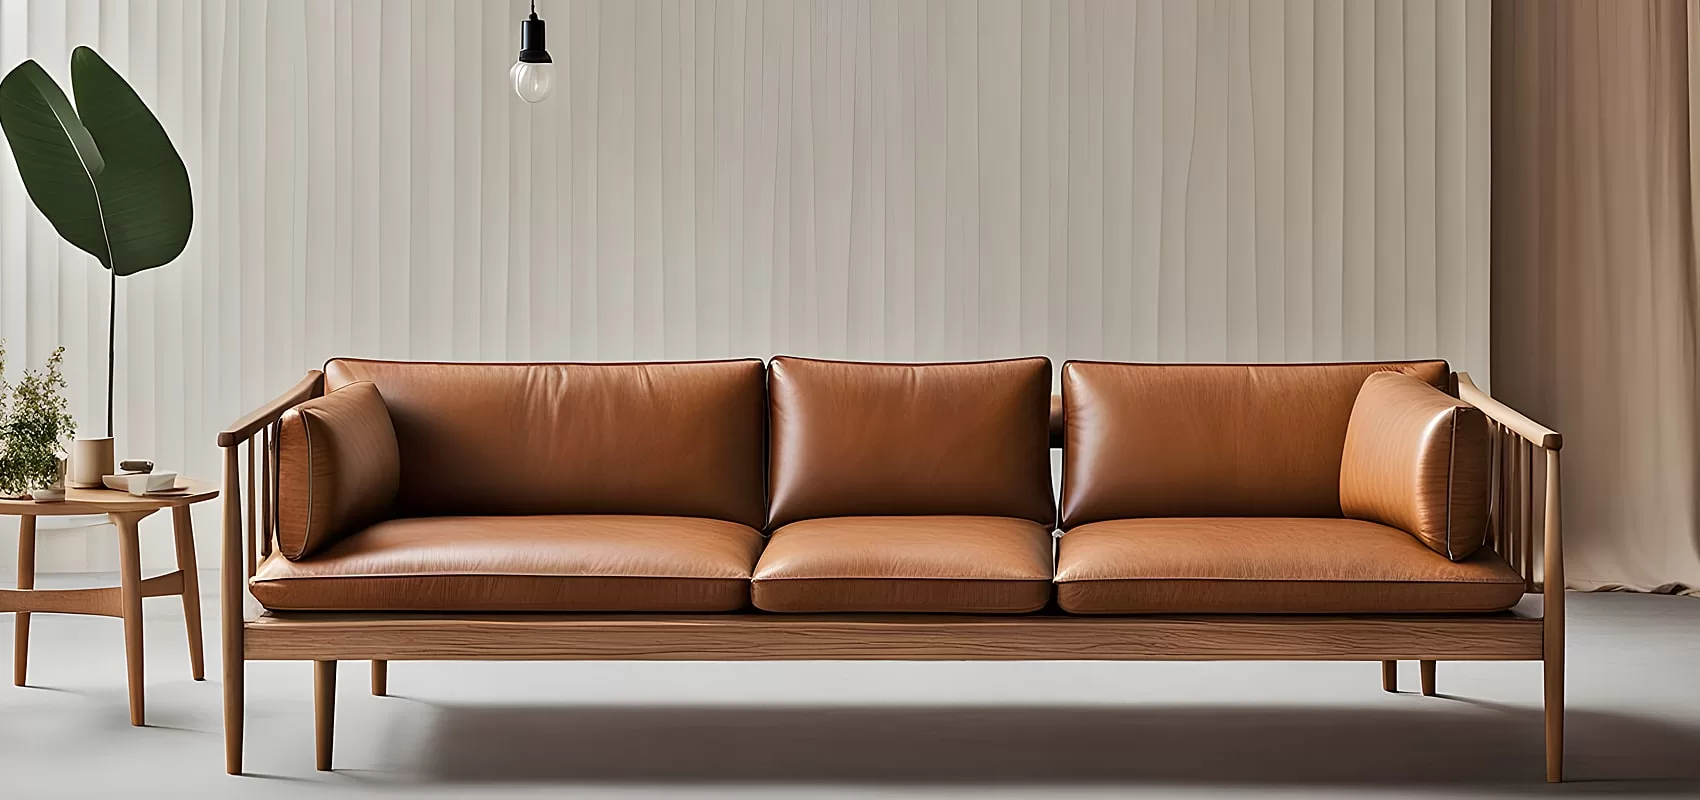 Wooden Couch | Wooden Sofa Set